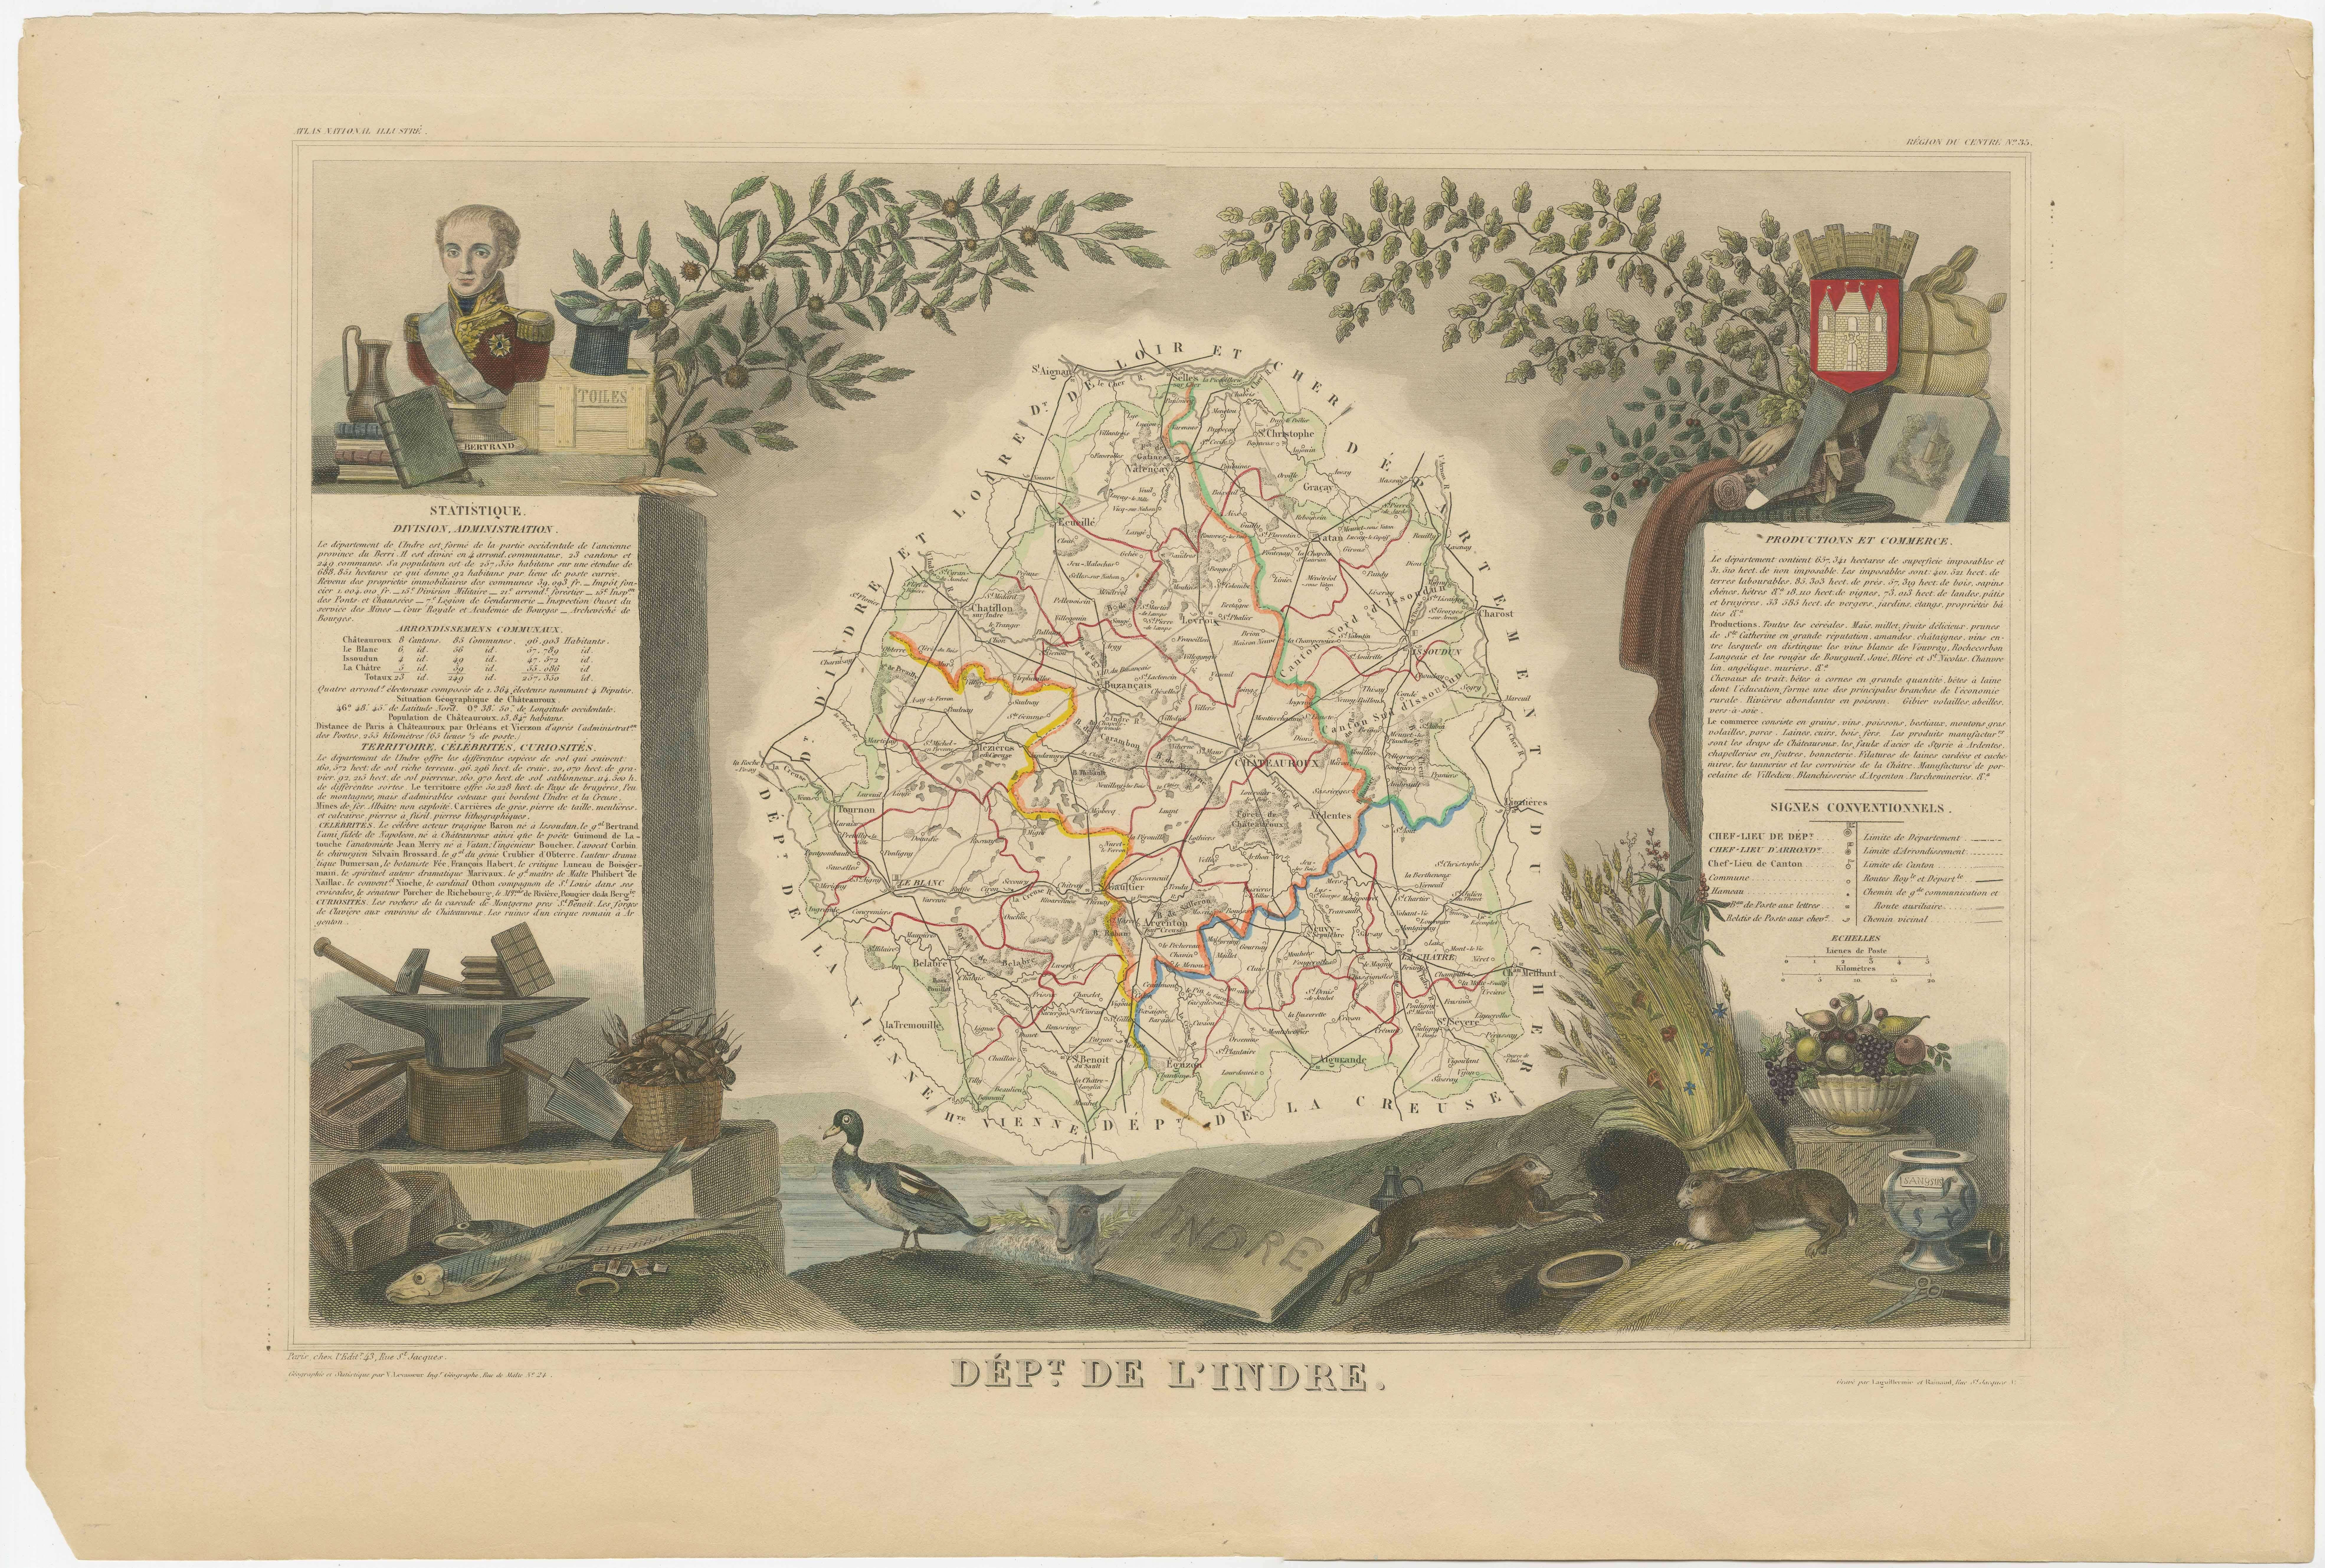 Antique map titled 'Dept. de l'Indre'. Map of the French department of Indre, France. Part of the Loire Valley wine region, this area is known for its production of Chinon wines, typically red, and production of Pouligny-Saint-Pierre, goats'-milk